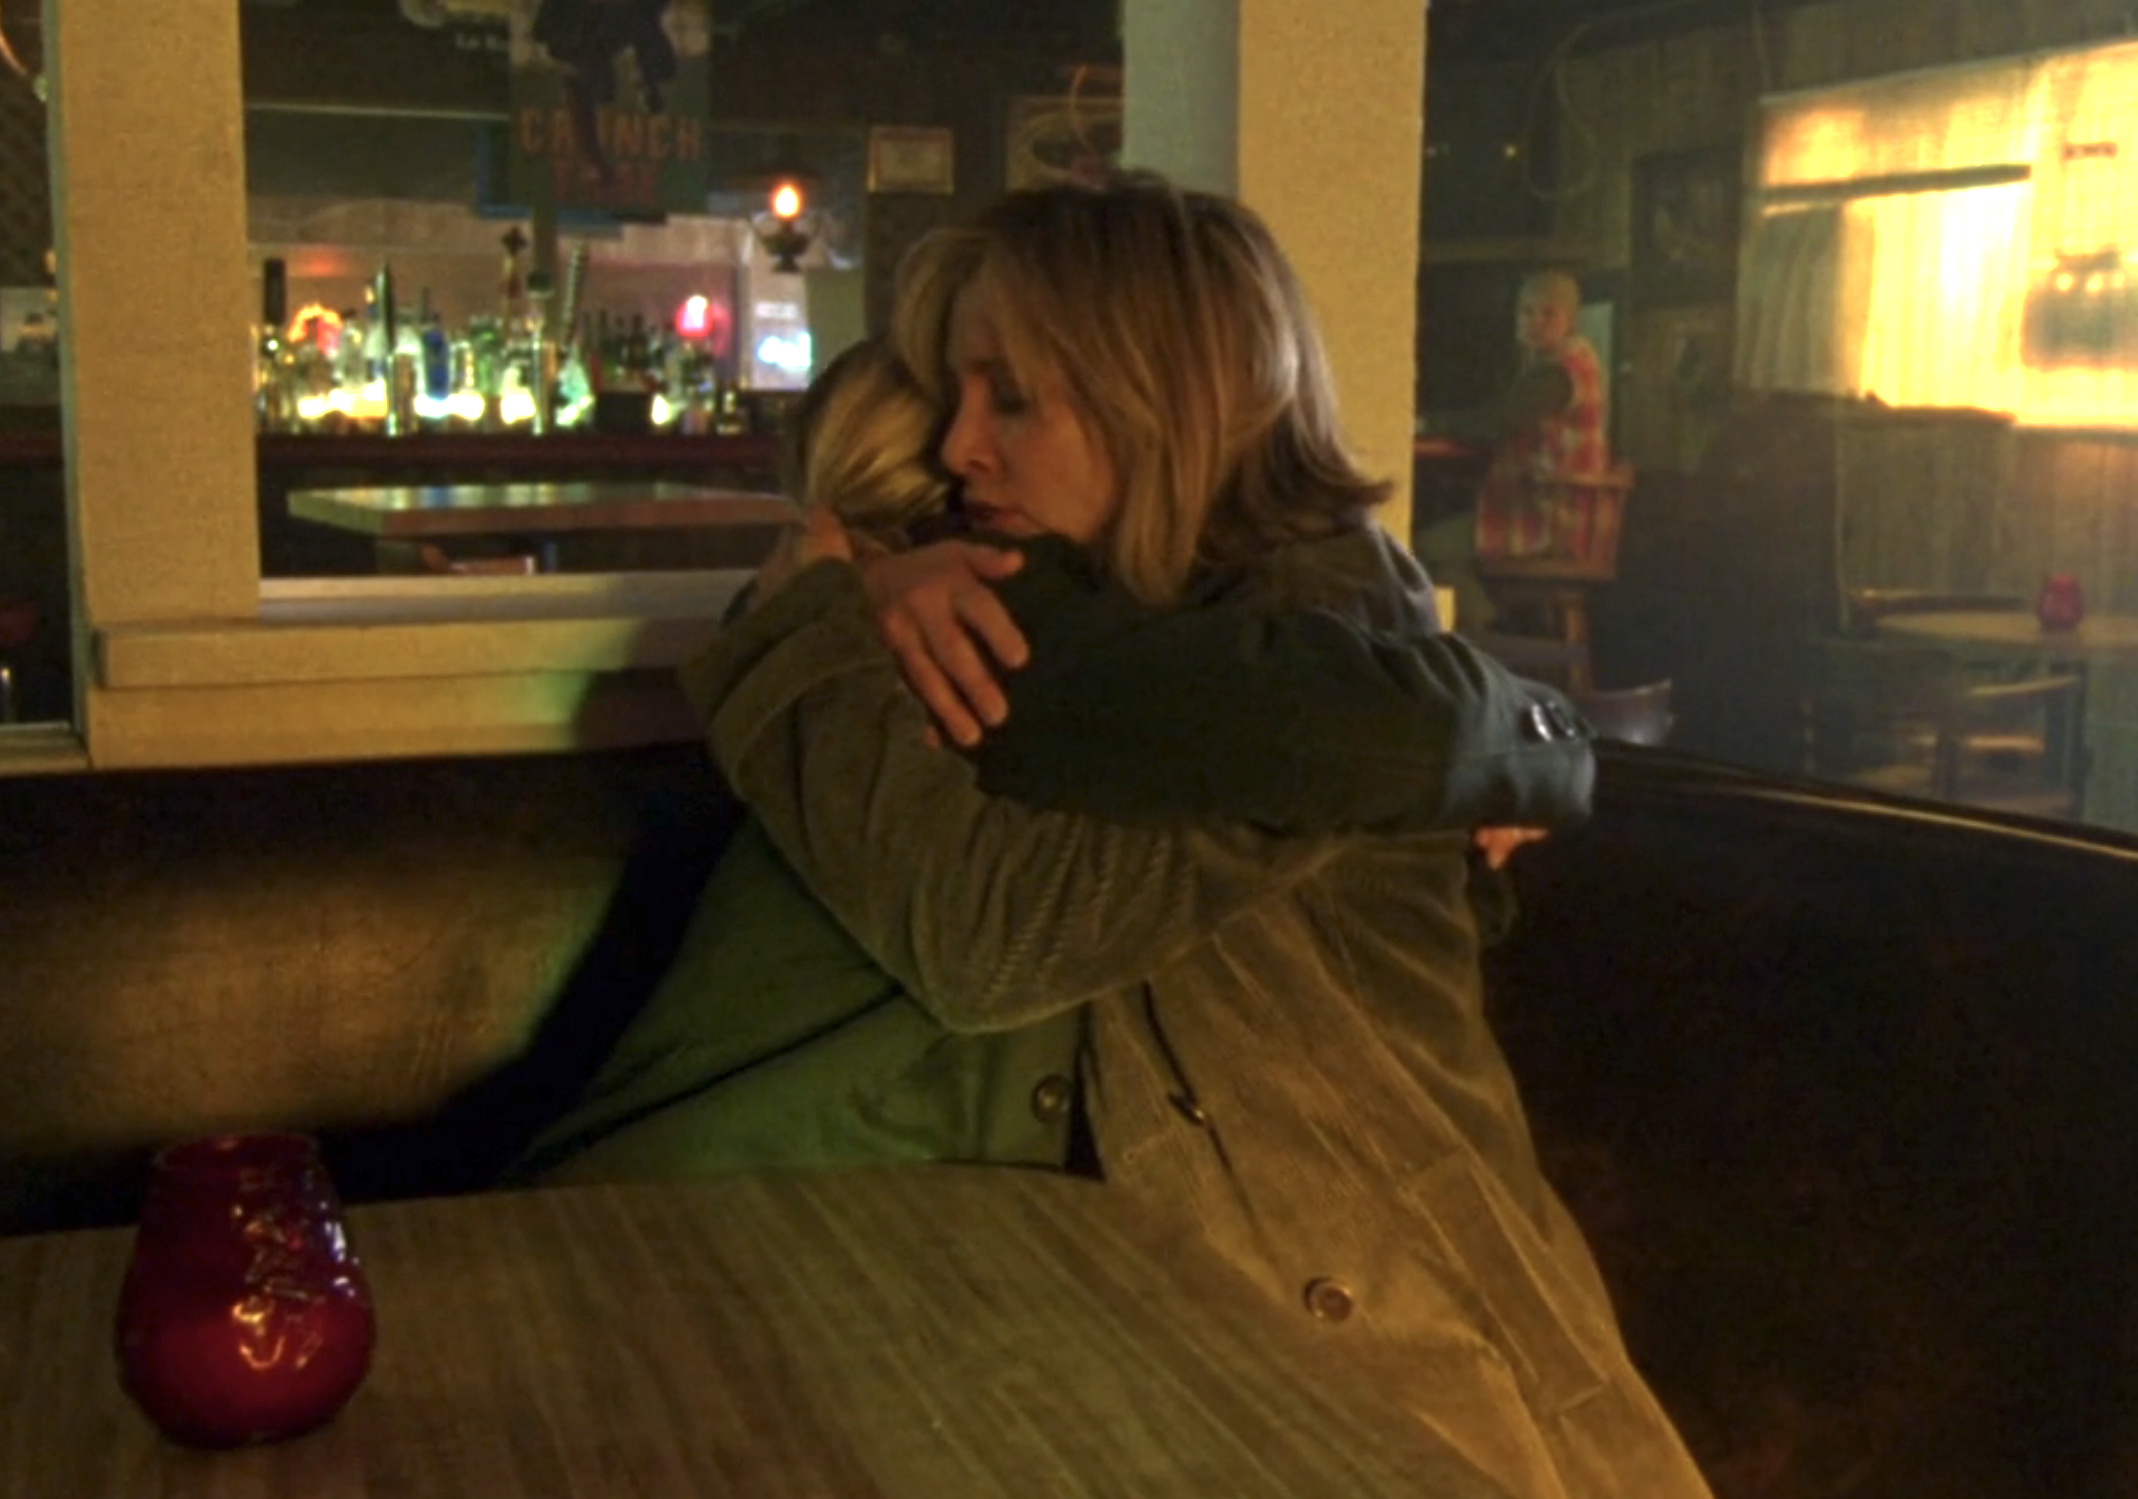 Screenshot from S1E16 of Veronica Mars. Veronica and her mom are at a bar sitting in a booth and hugging.